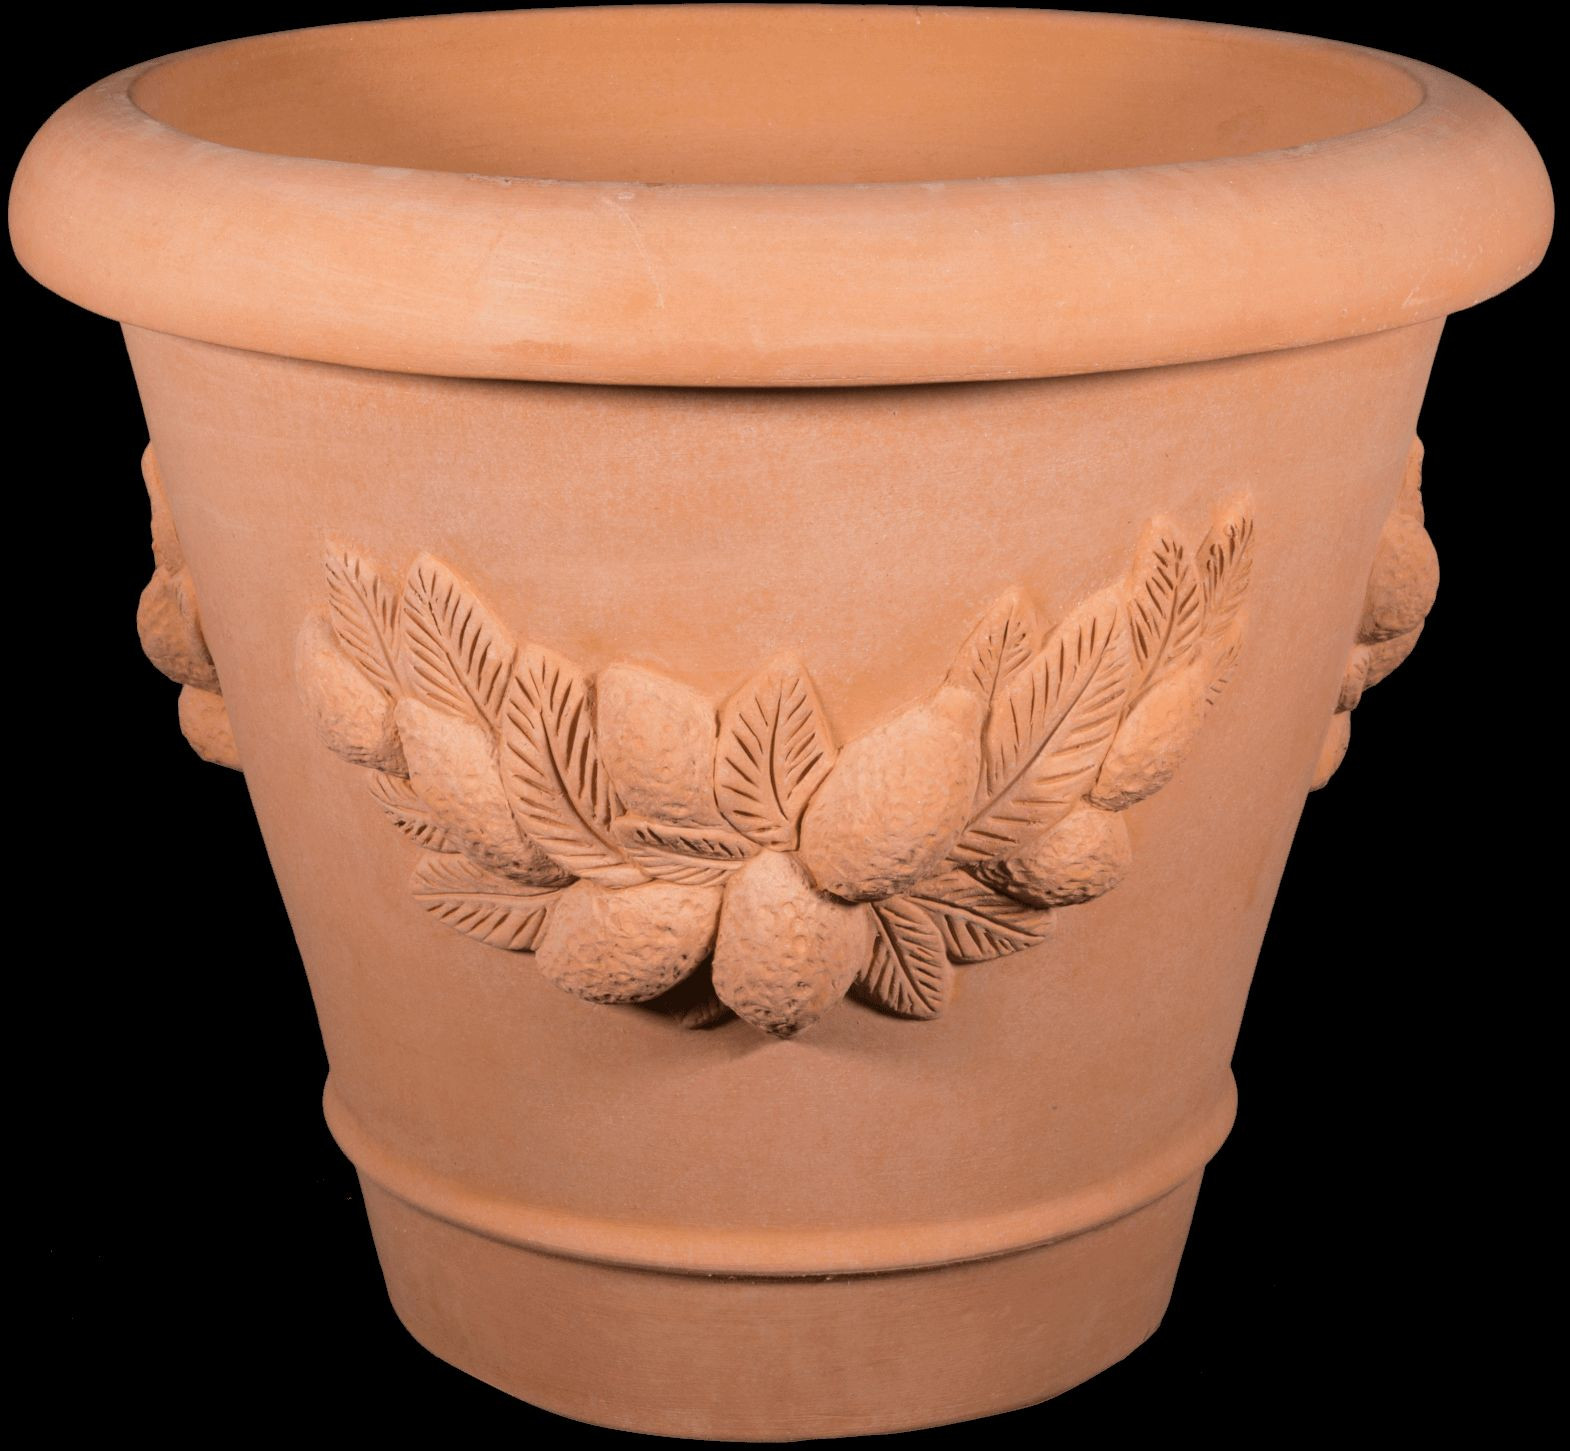 27 Recommended 8 Square Vase 2024 free download 8 square vase of plastic square vase lovely terracotta vases for sale from impruneta with plastic square vase lovely terracotta vases for sale from impruneta